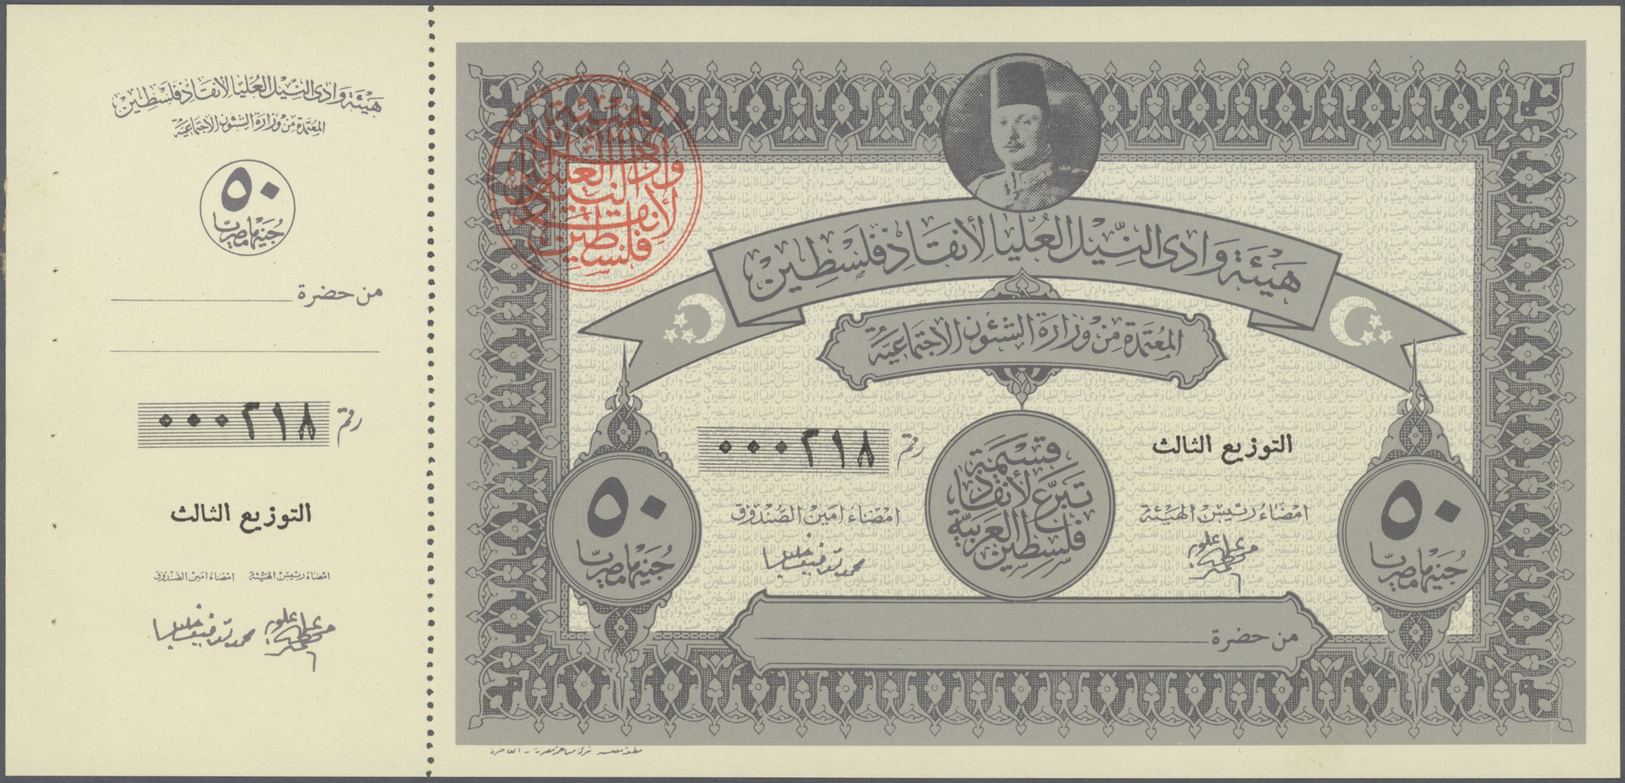 00701 Egypt / Ägypten: set of 6 warfund notes 5, 10, 2x 50 and 2x 100 Pounds ND, all with counterfoil at left and some p